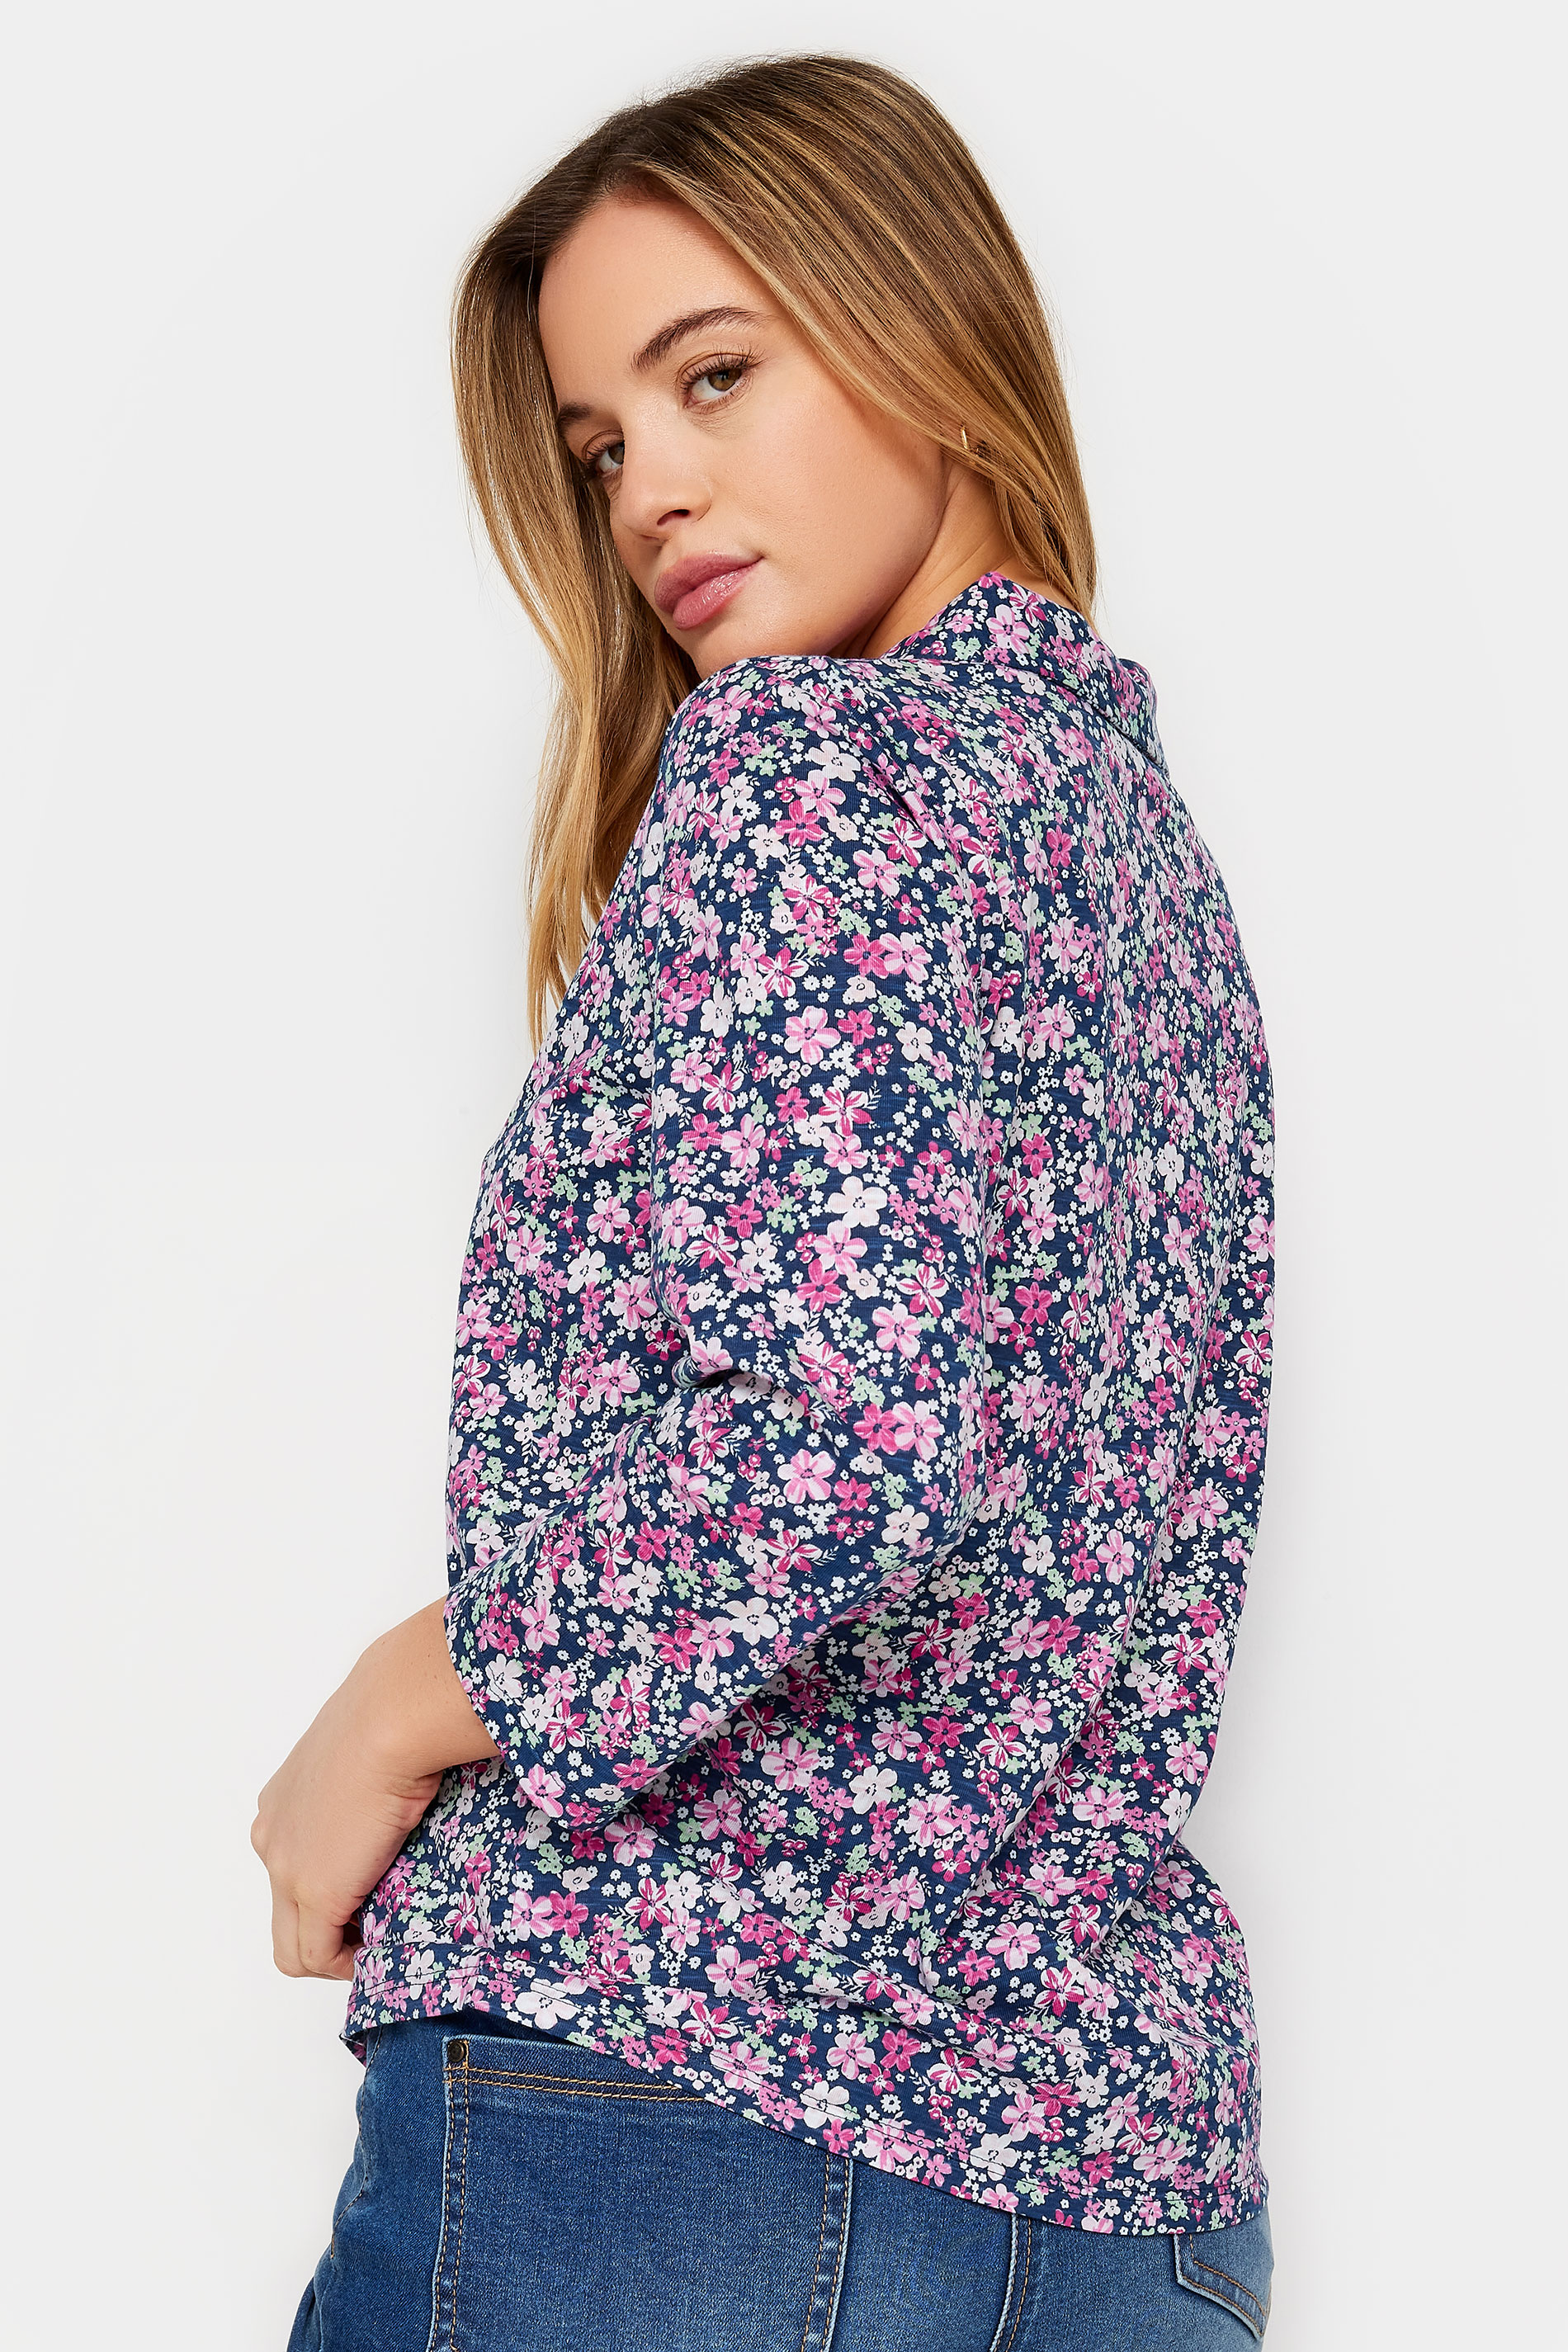 M&Co Petite Pink Floral Print Cotton Collared Shirt | M&Co 2